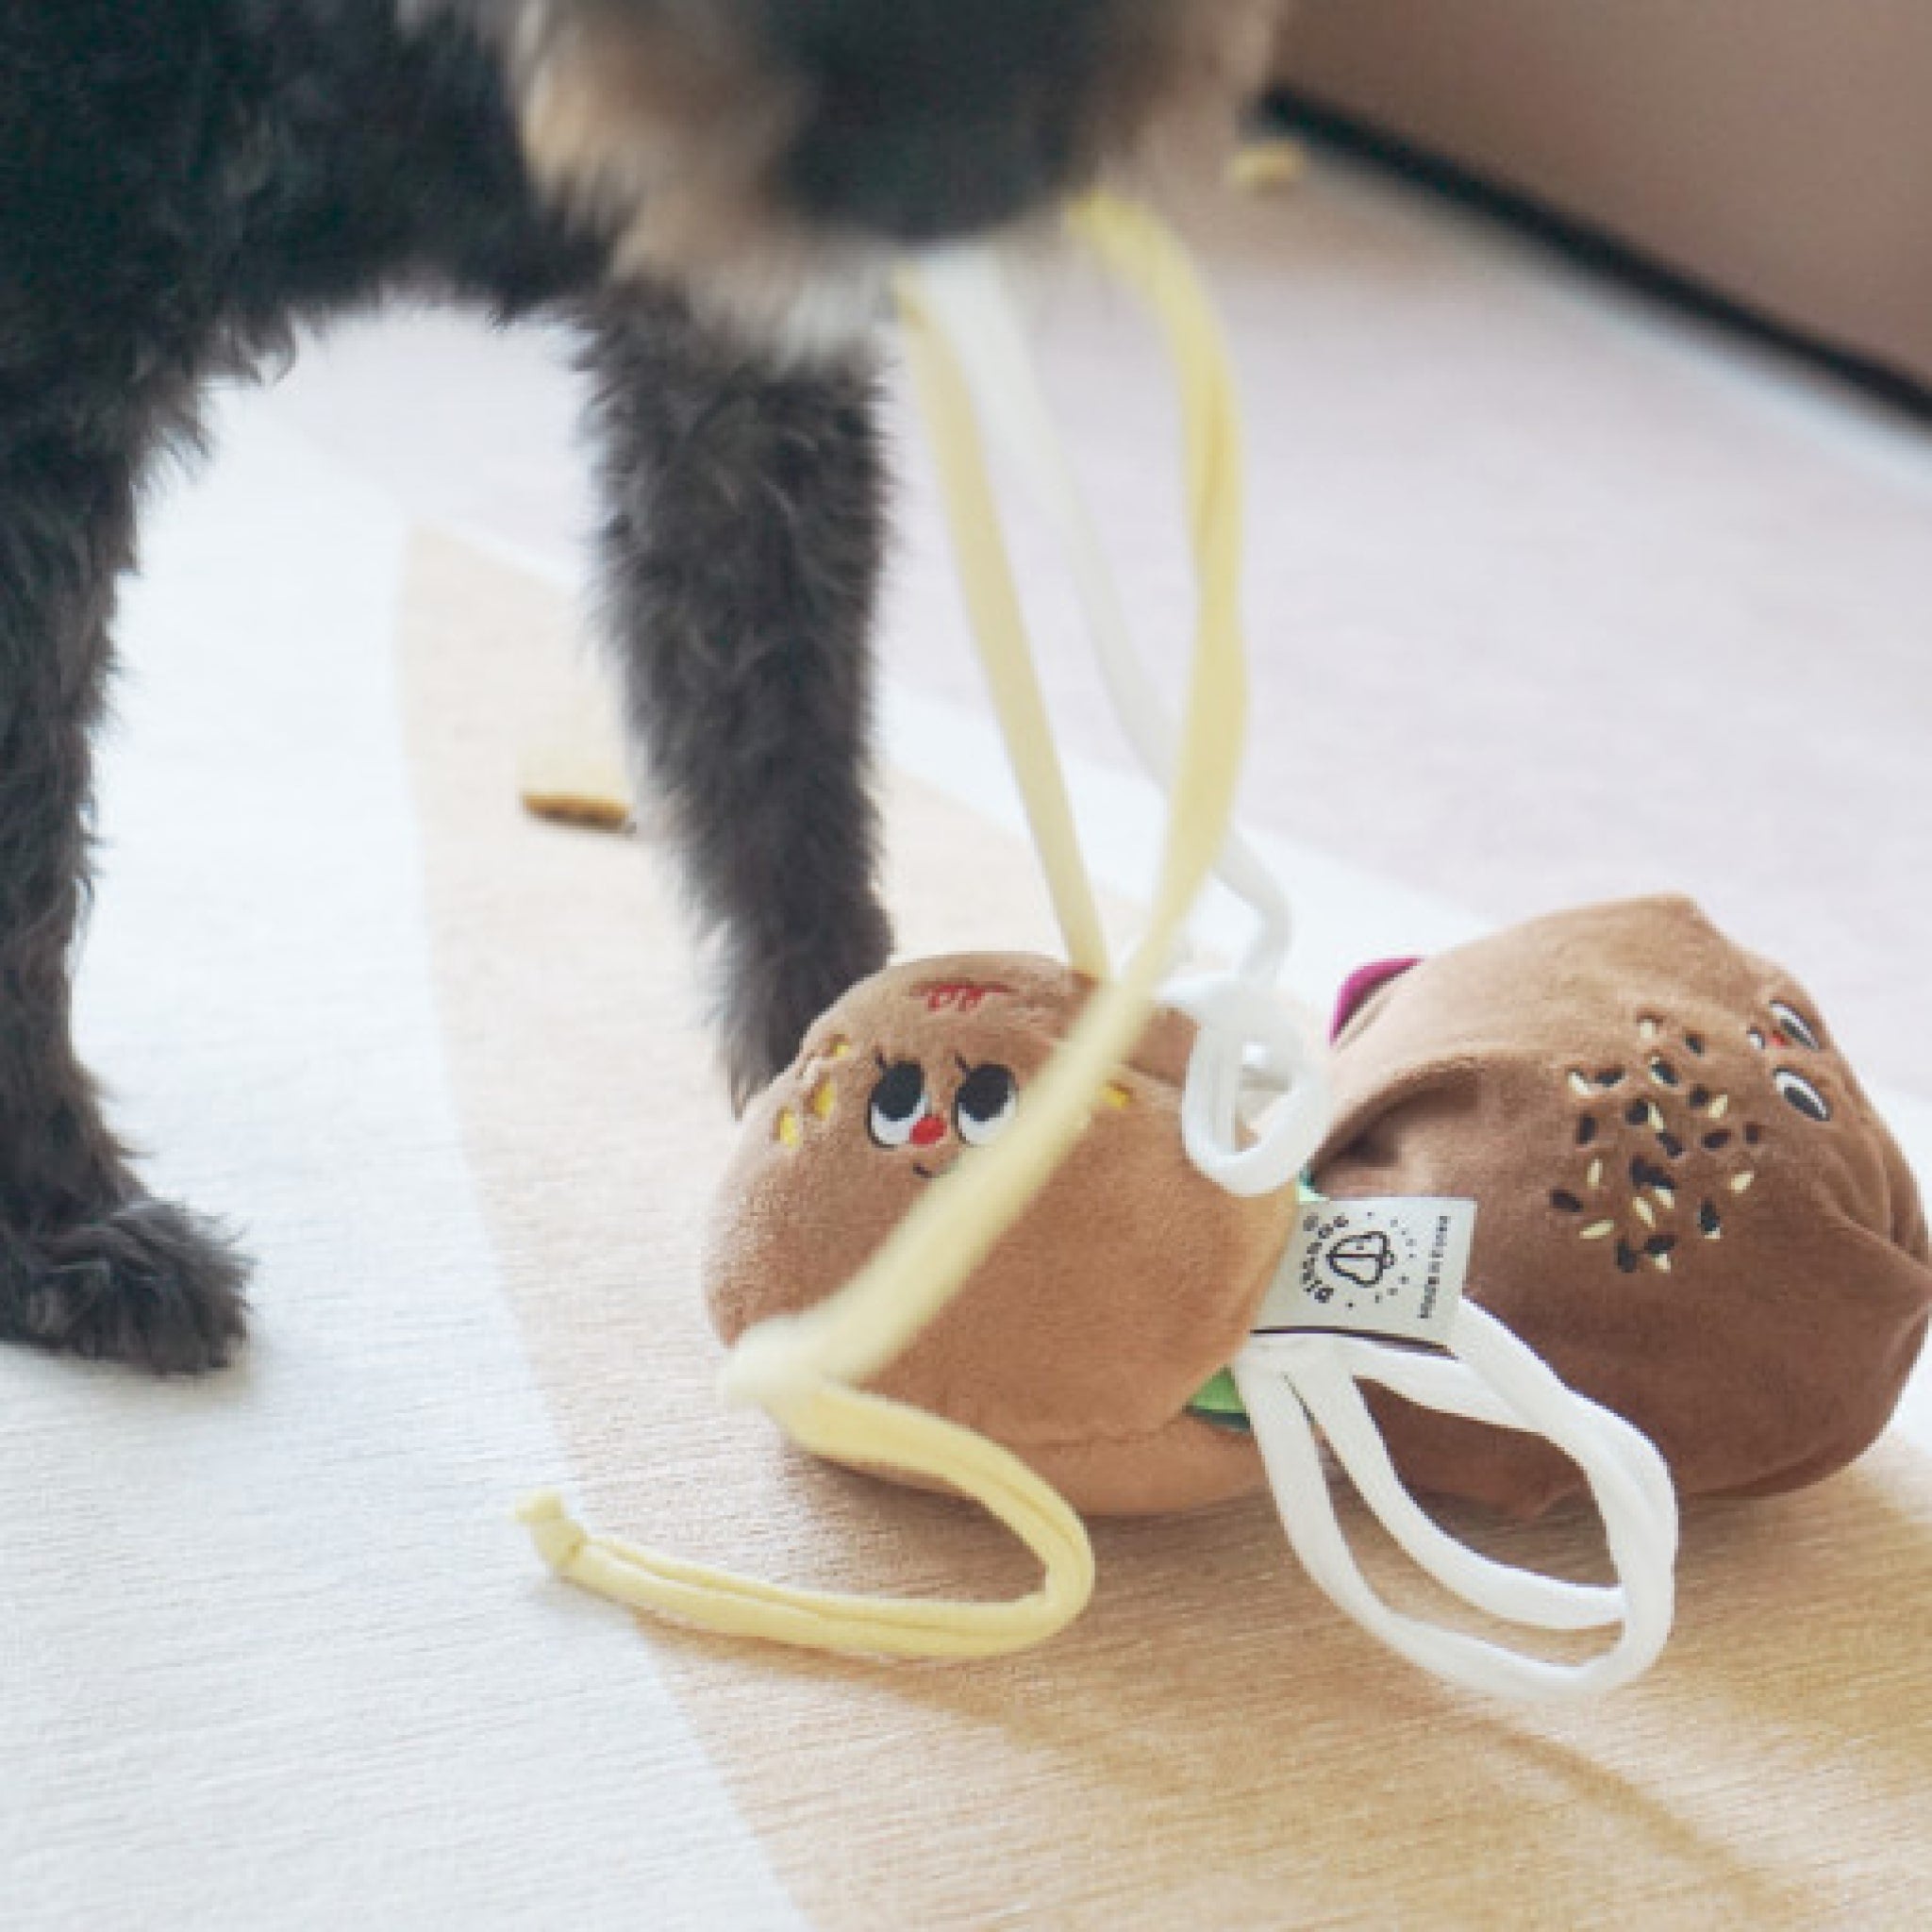 dog pulling apart the salad bread nosework toy